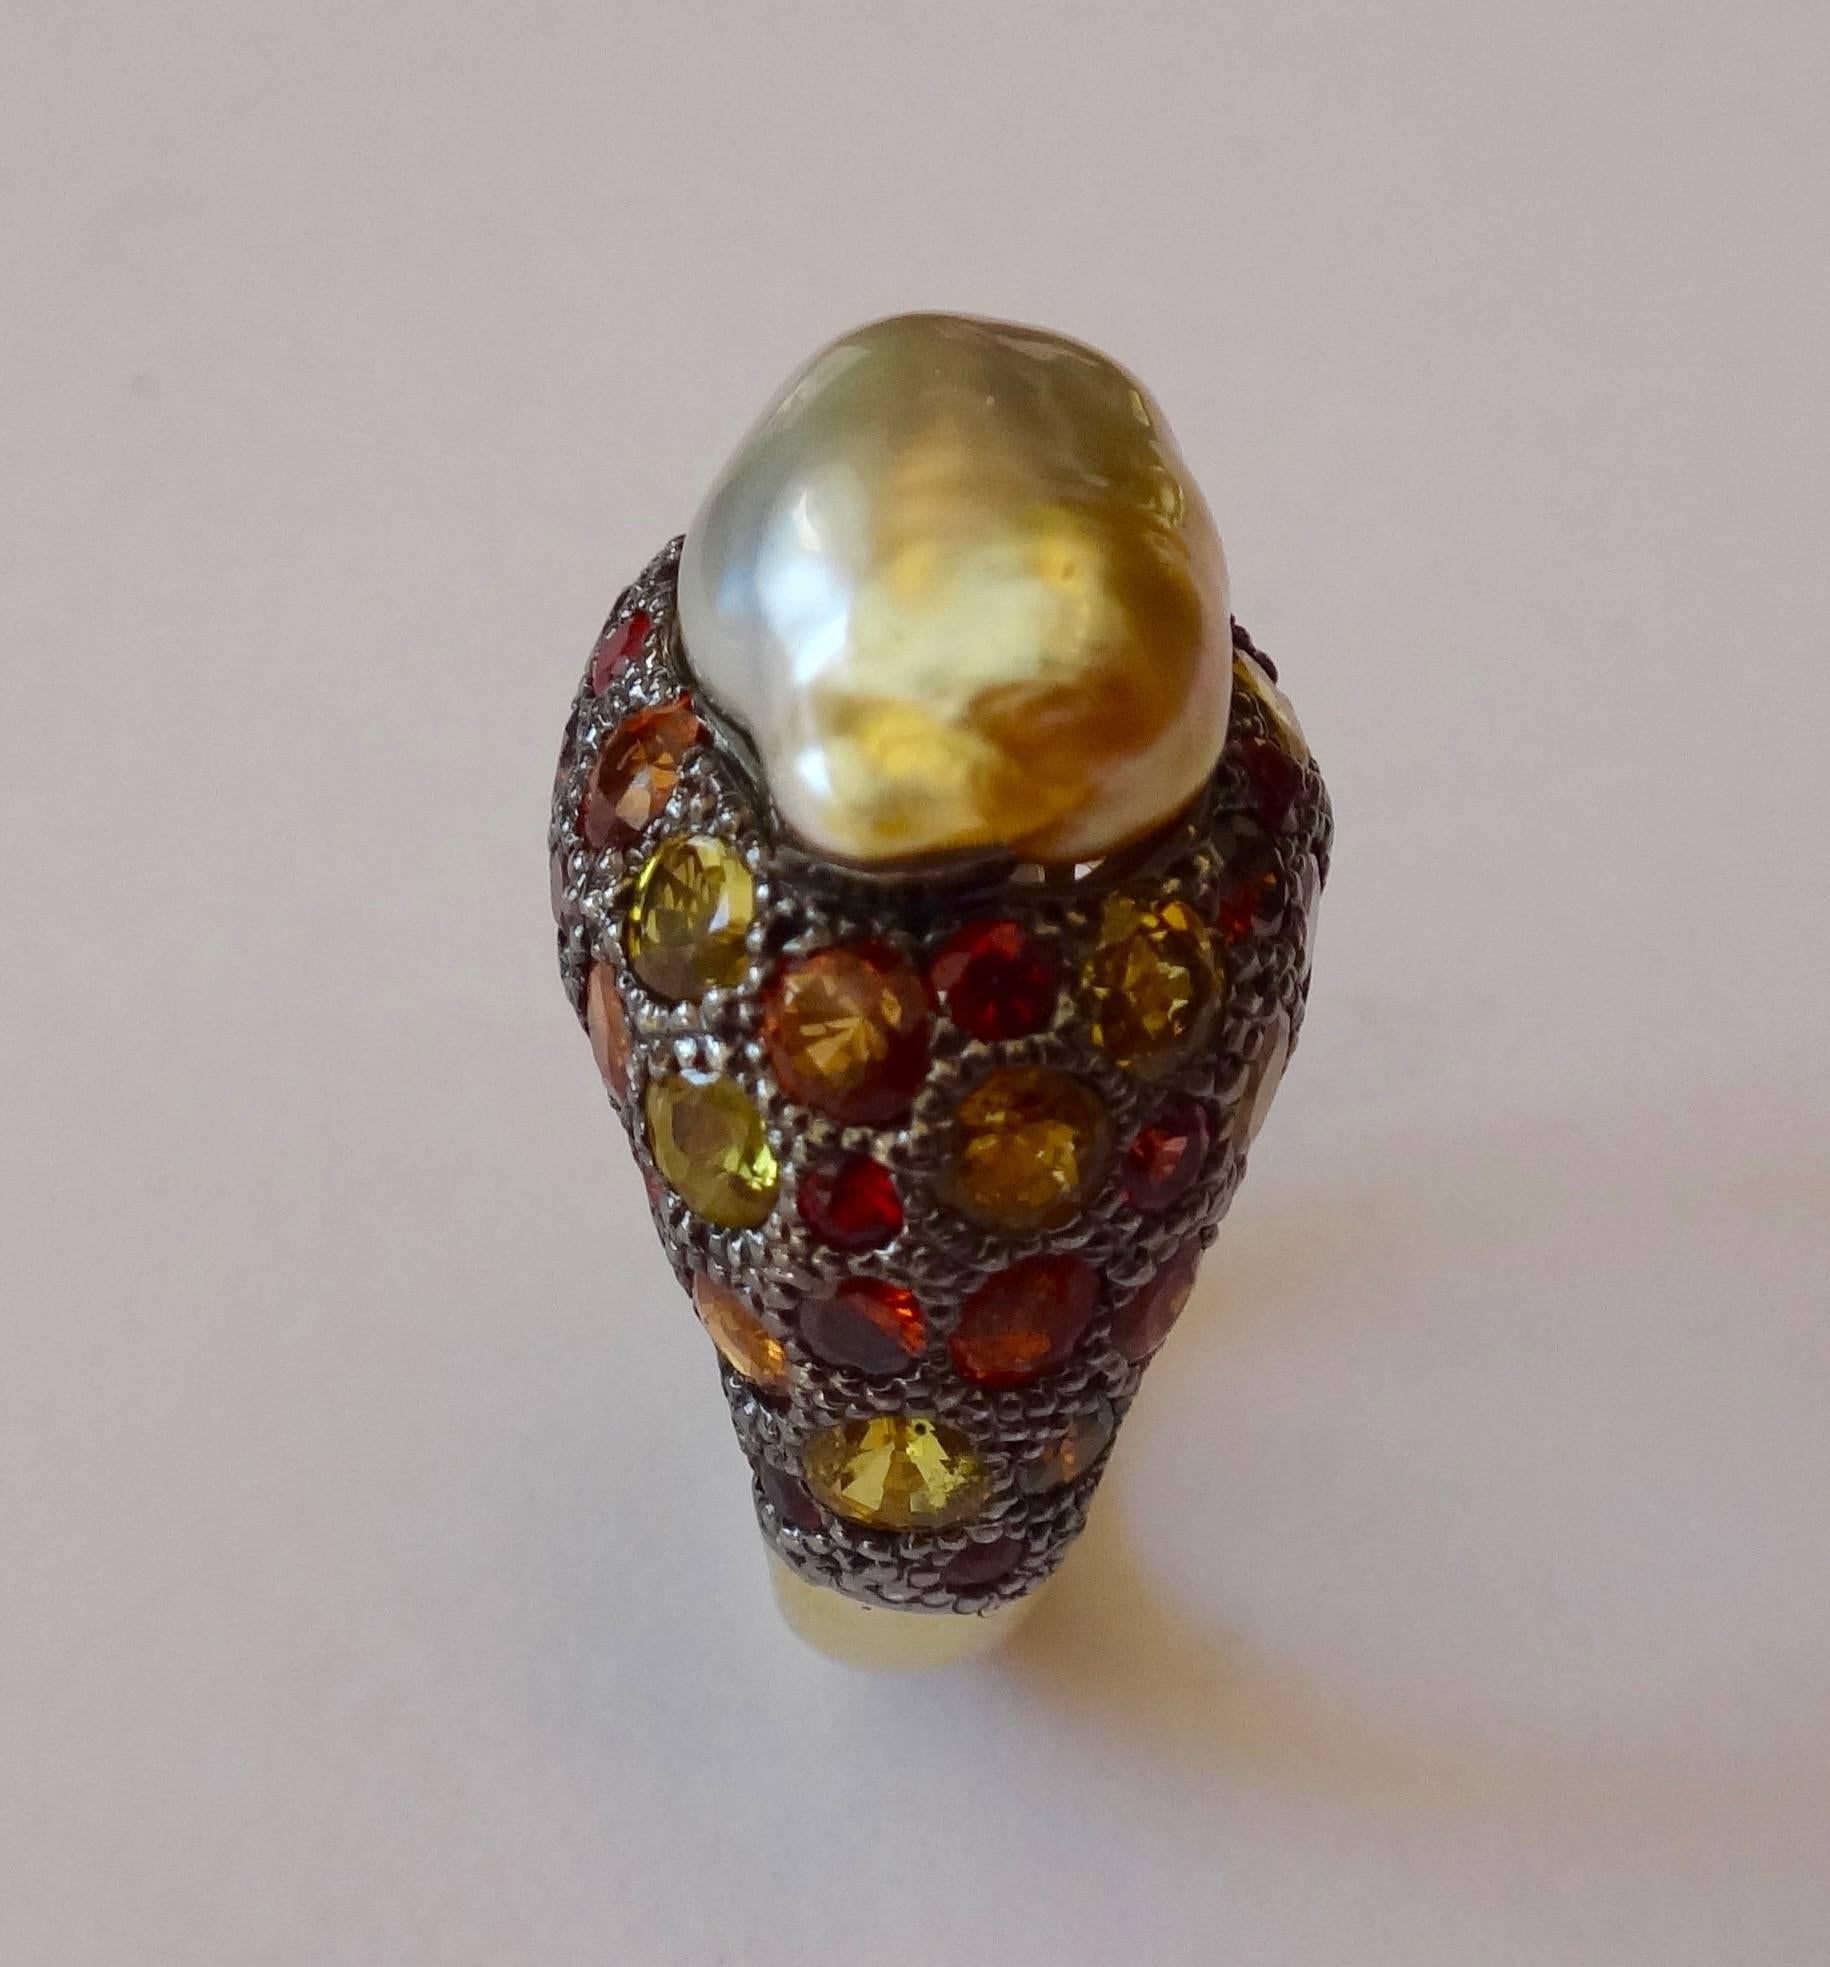 A Maluka pearl (Origin: Indonesia) in shades of gray and gold is mounted in a pave set dome ring of yellow and orange sapphires along with cognac colored diamonds.  The pave work is executed in blackened silver.  The remainder of the ring, including